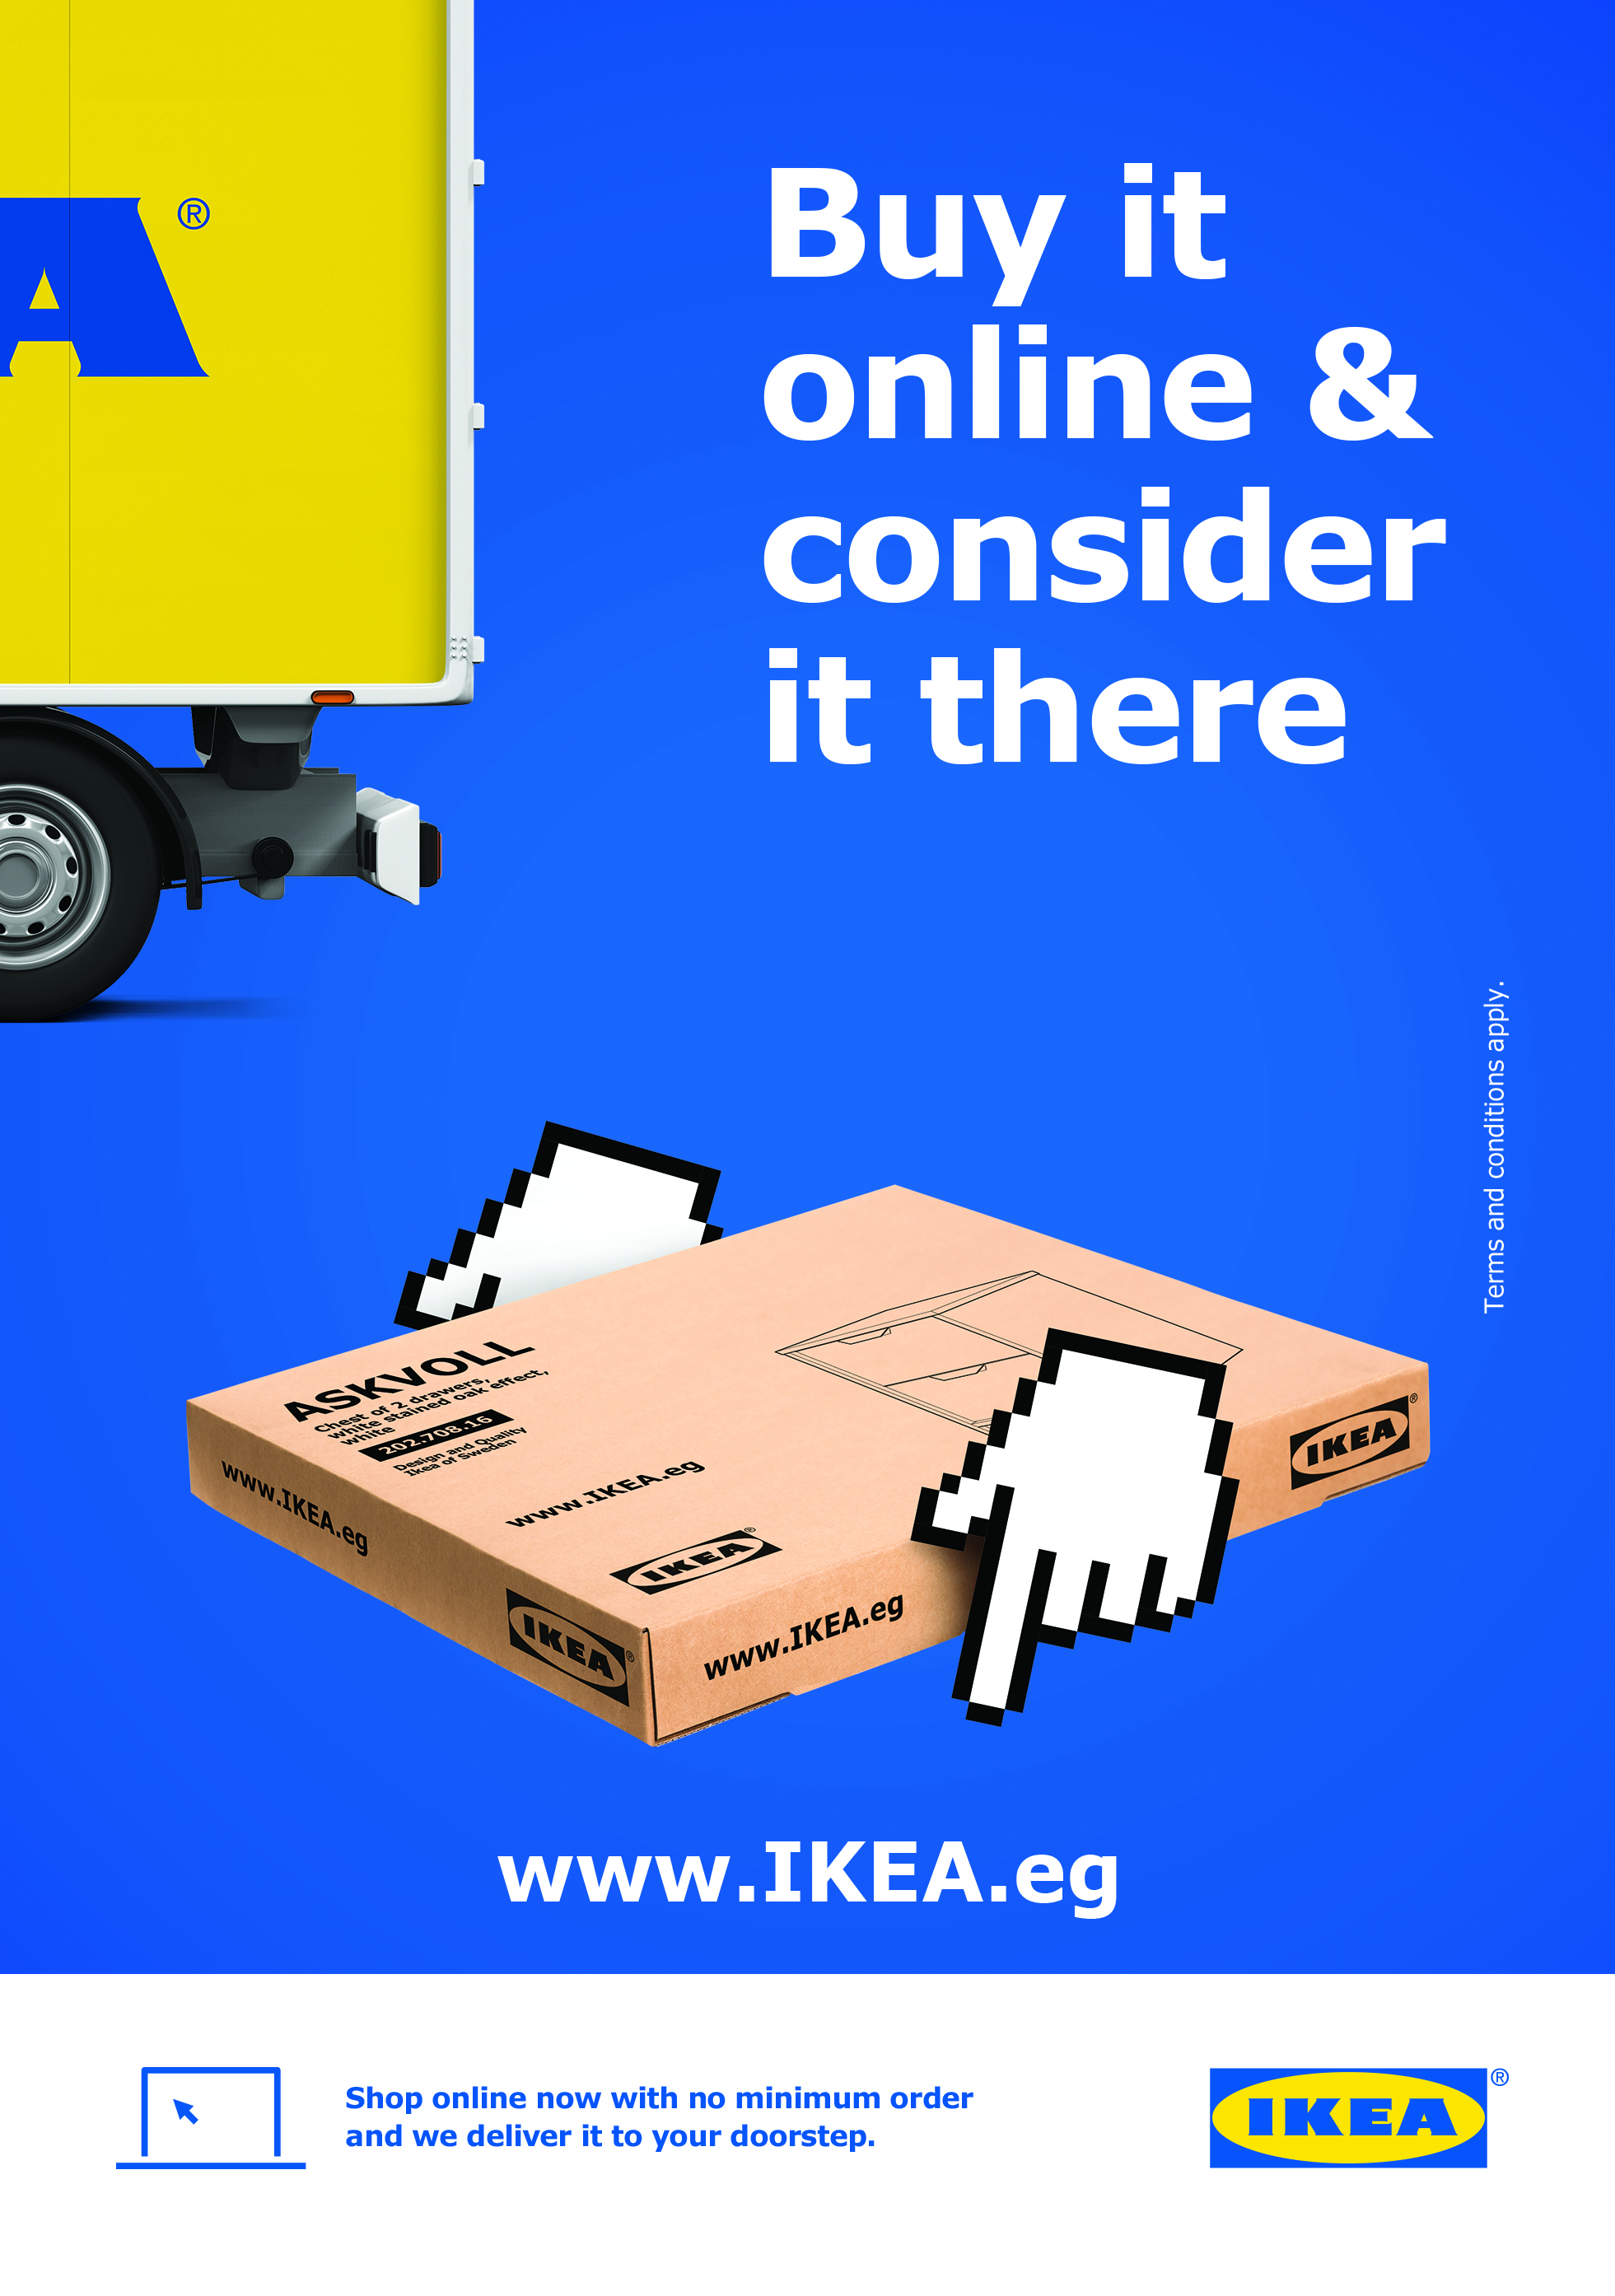 Your IKEA, is Introducing Online Shopping - Scoop Empire